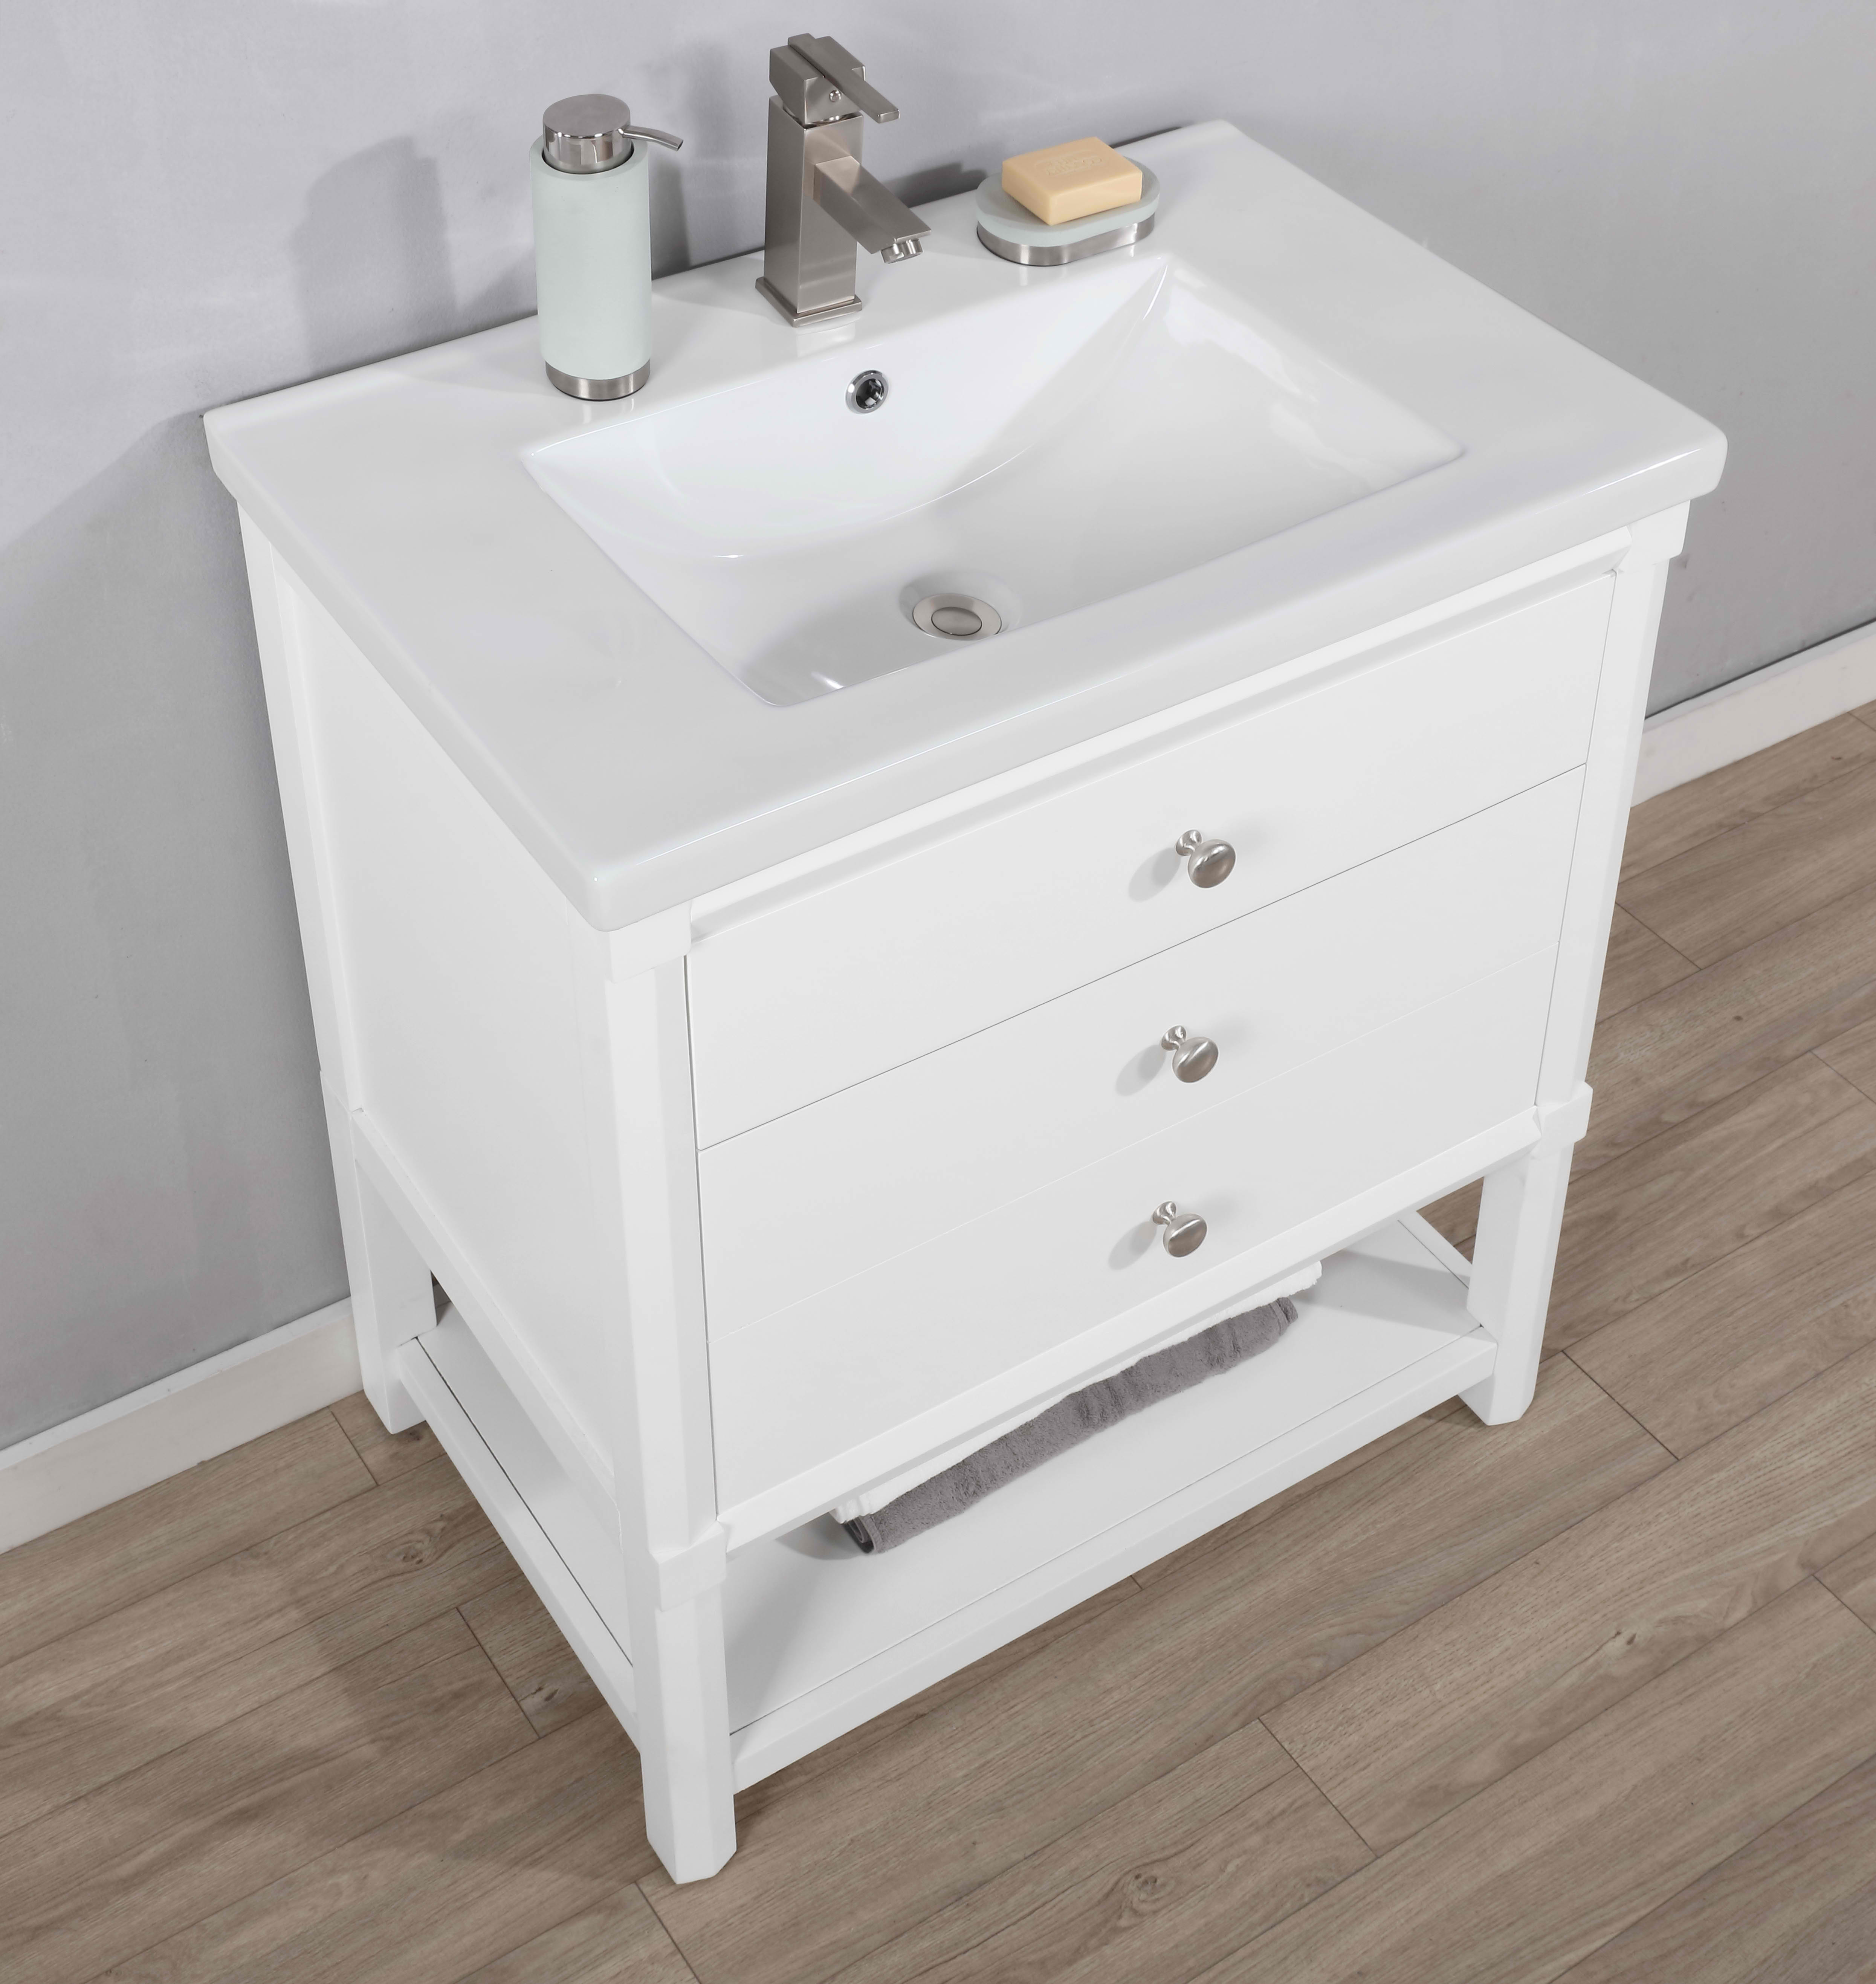 Transitional 30" Single Sink Vanity with Porcelain